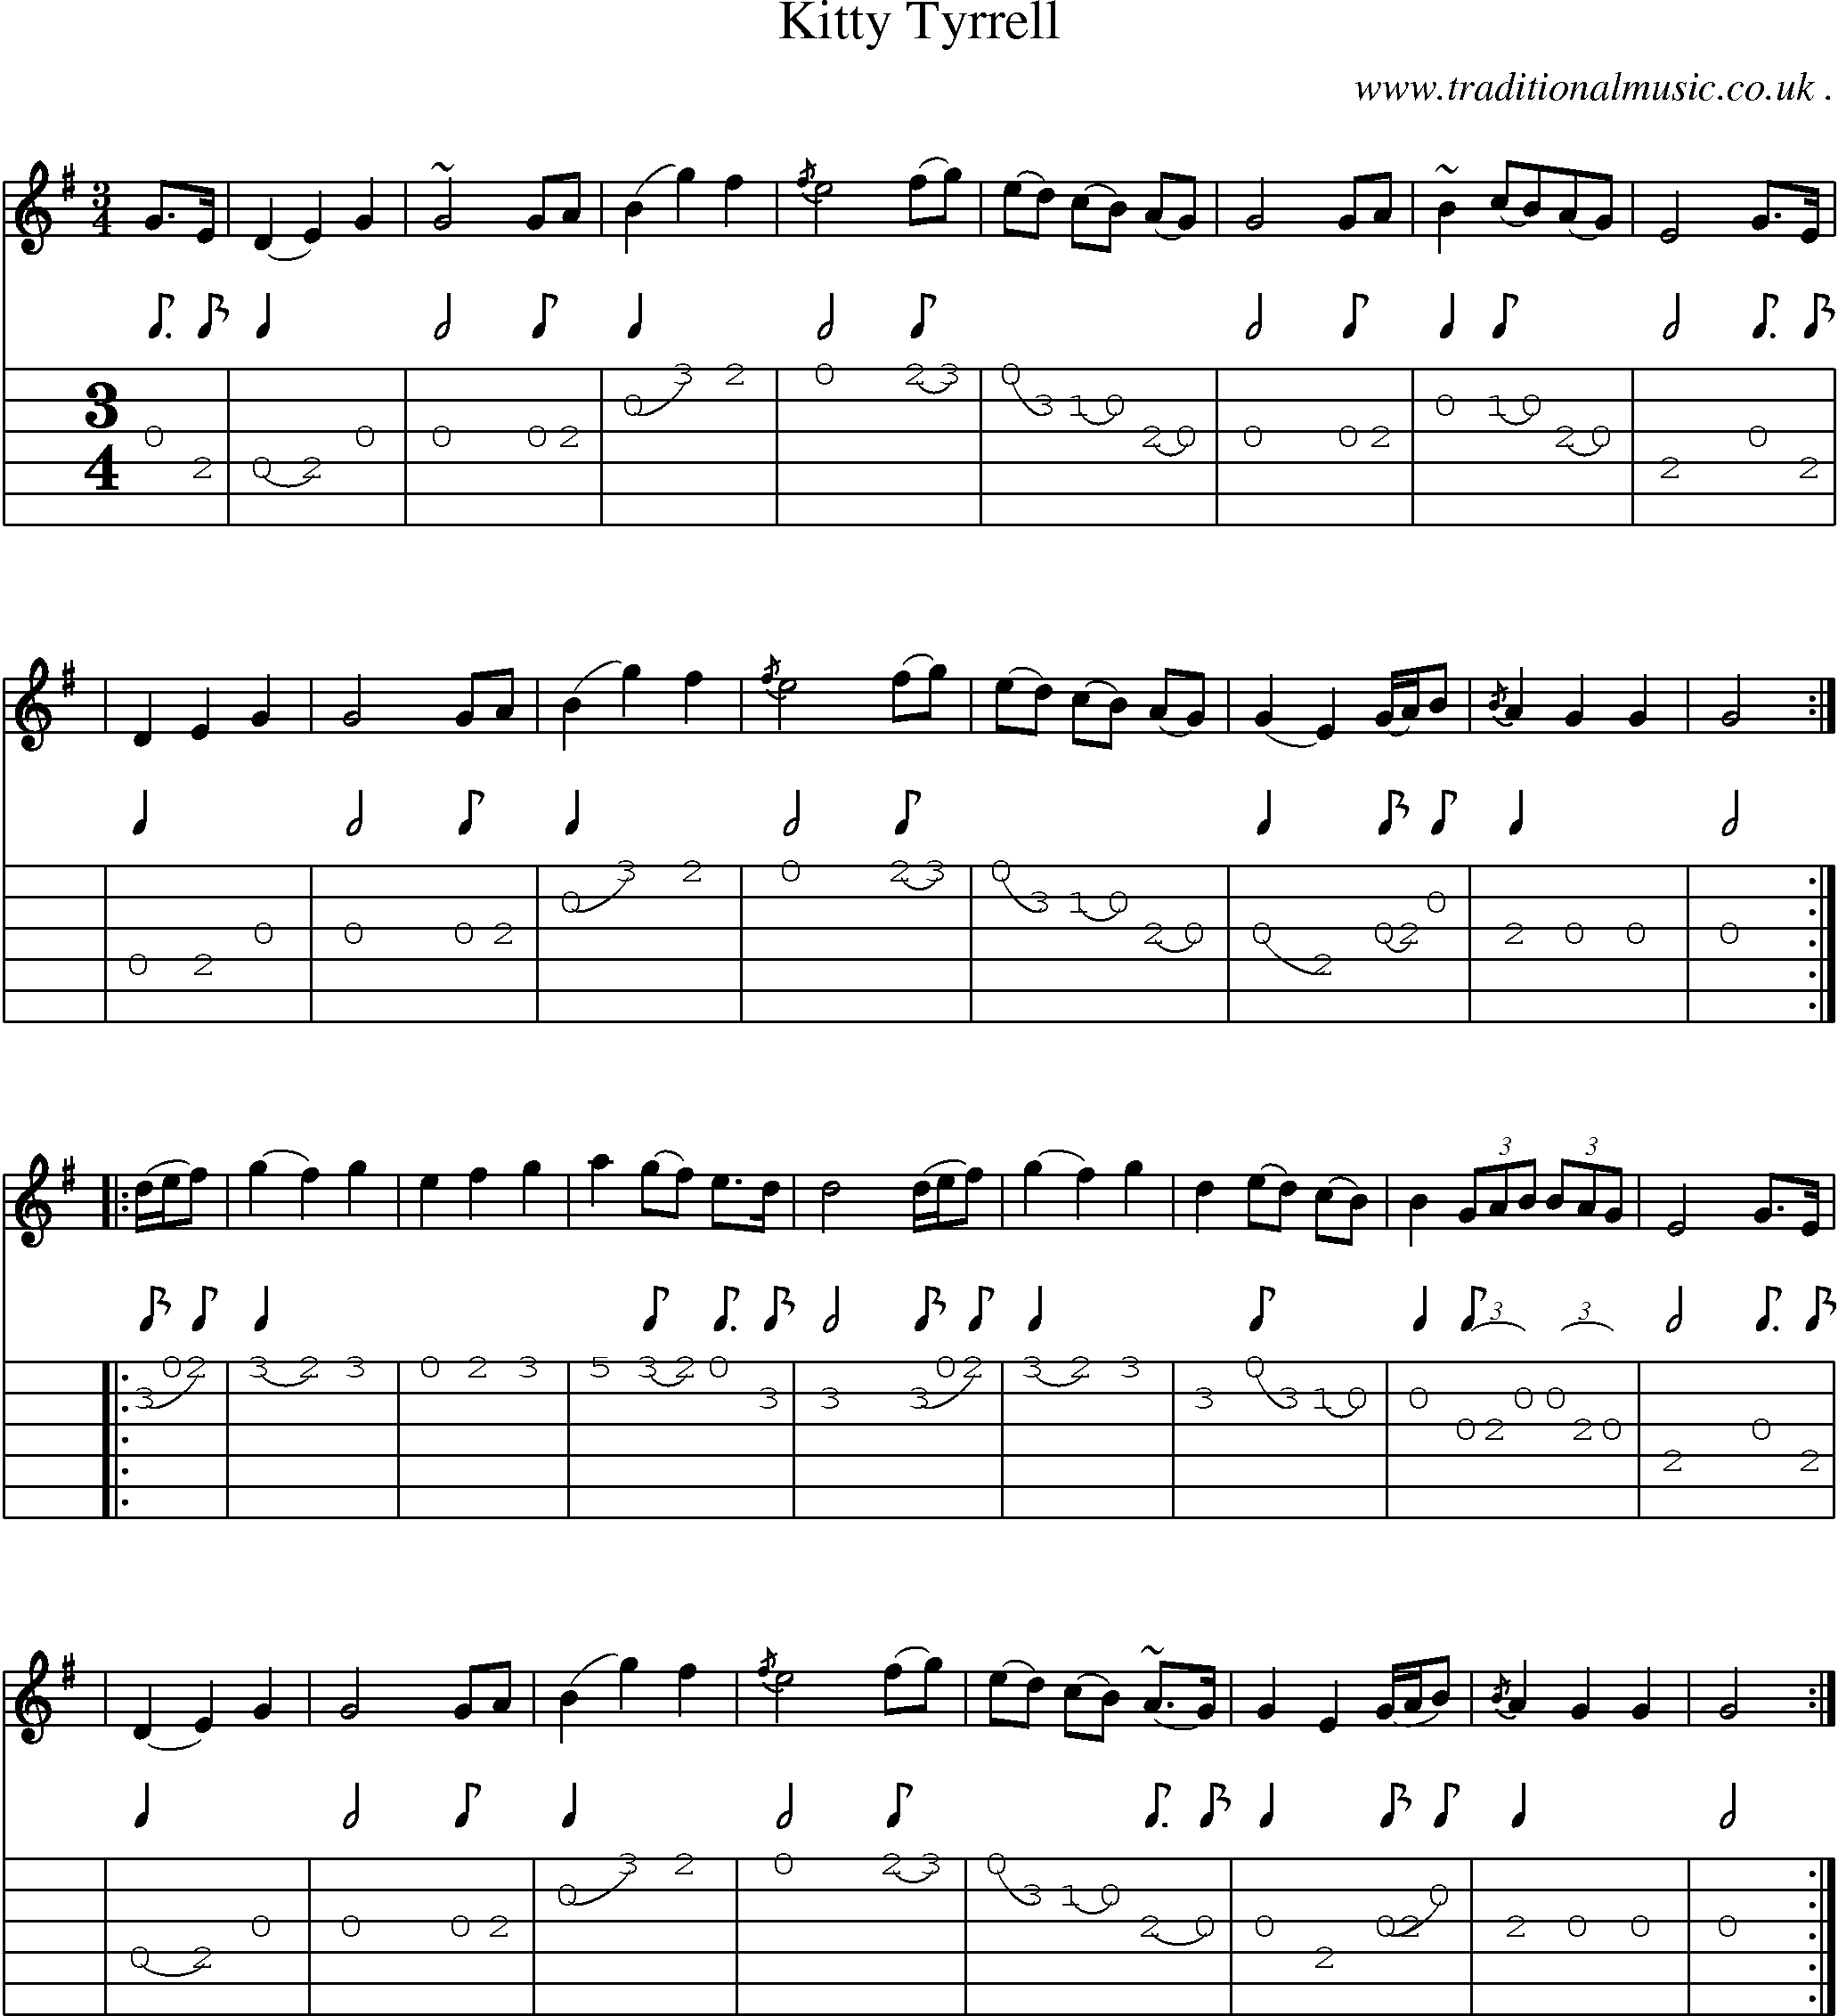 Sheet-music  score, Chords and Guitar Tabs for Kitty Tyrrell